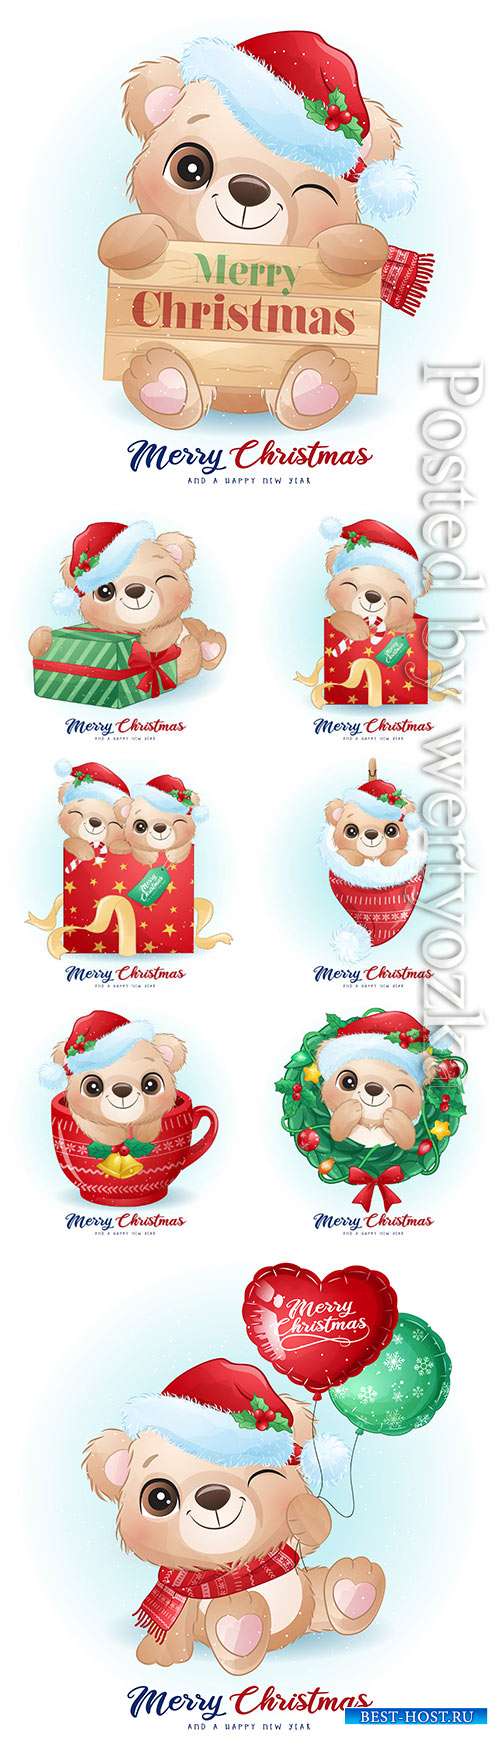 Cute doodle bear for christmas day with watercolor vector illustration